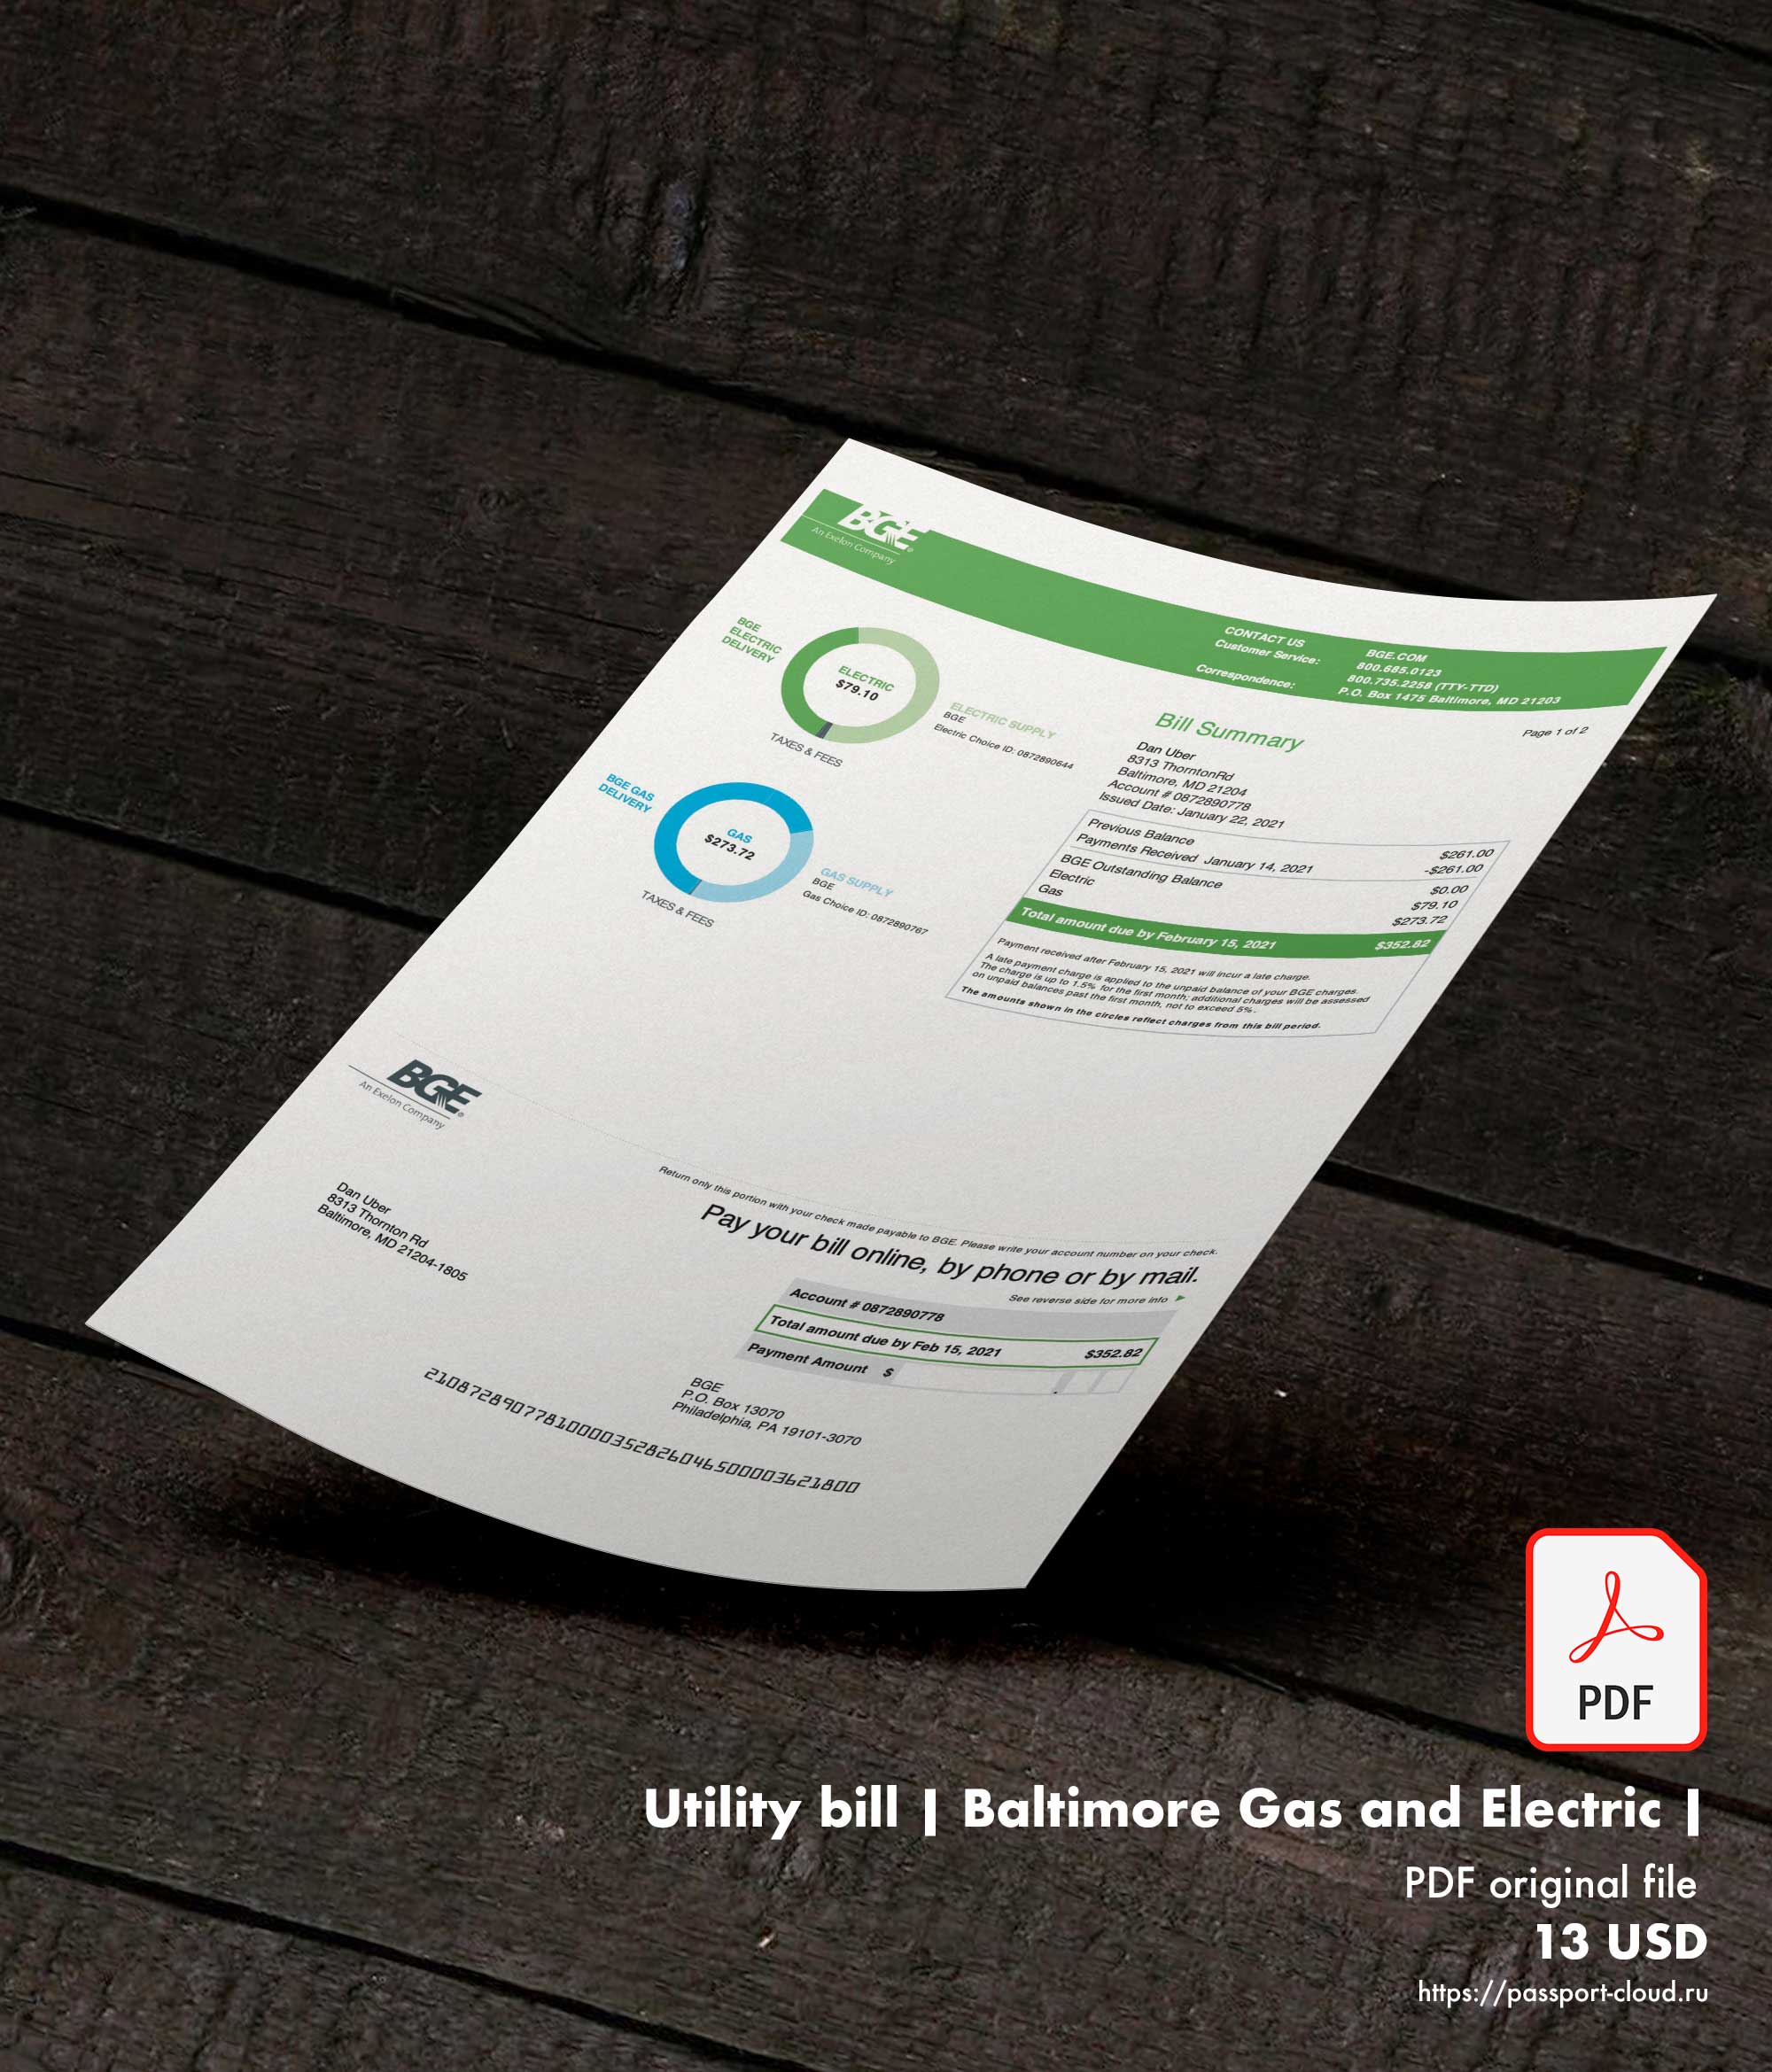 Utility bill | Baltimore Gas and Electric | USA |1